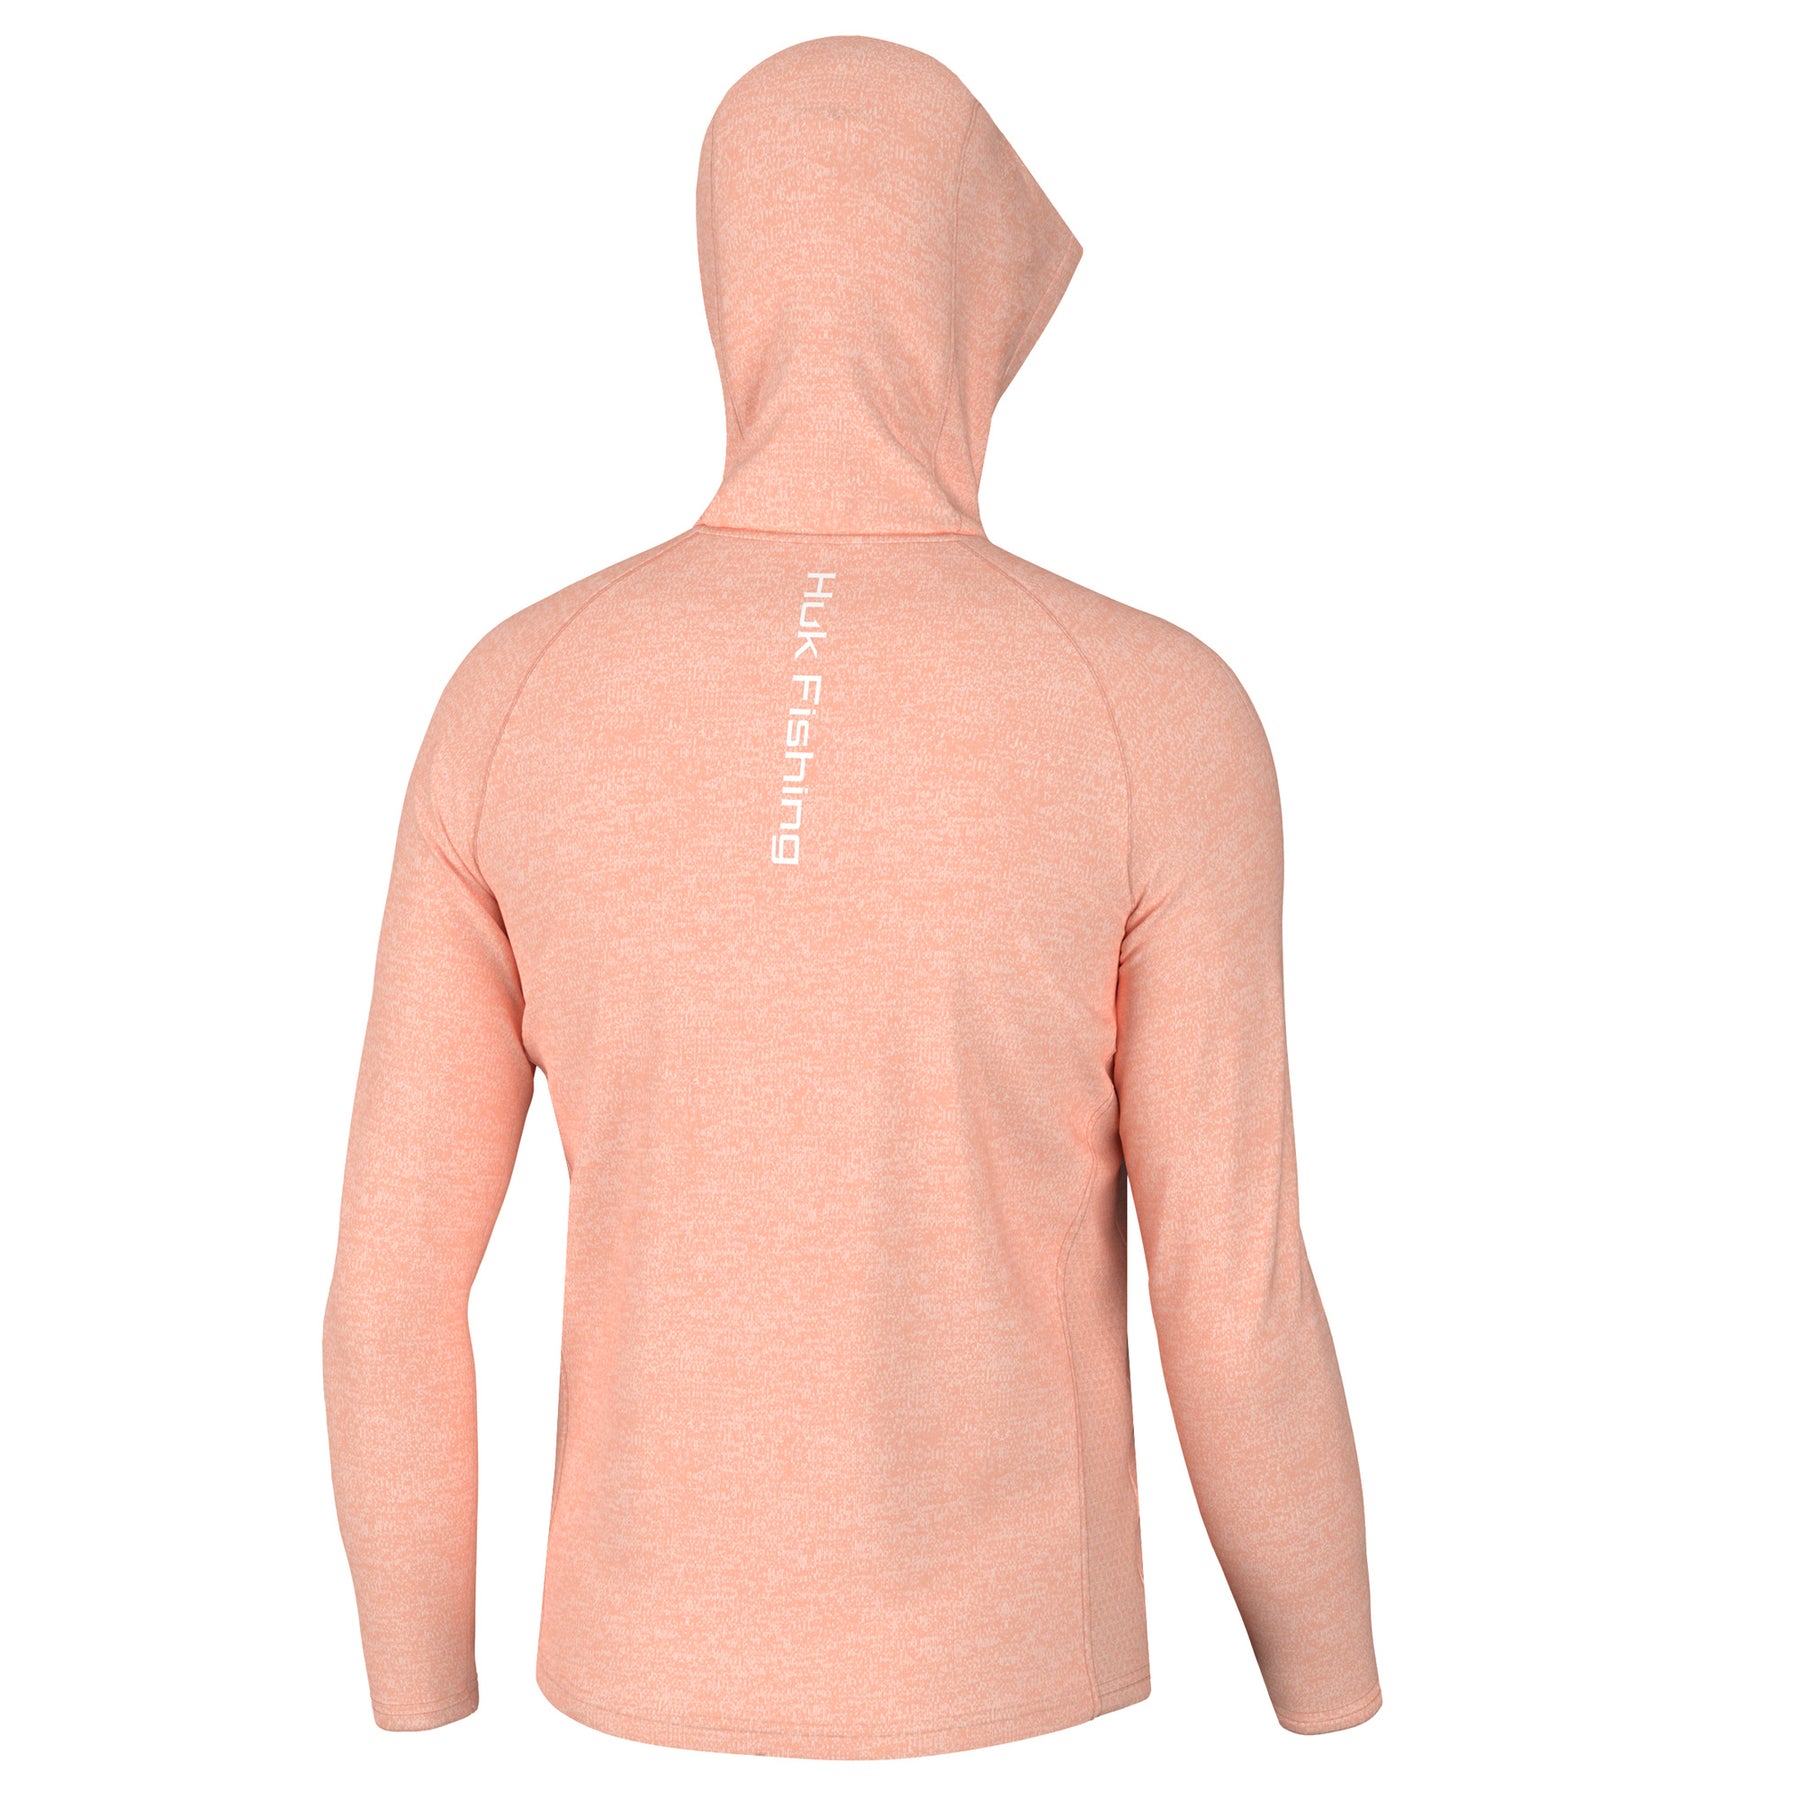 Huk Pursuit Vented Hoodie - Volcanic Ash